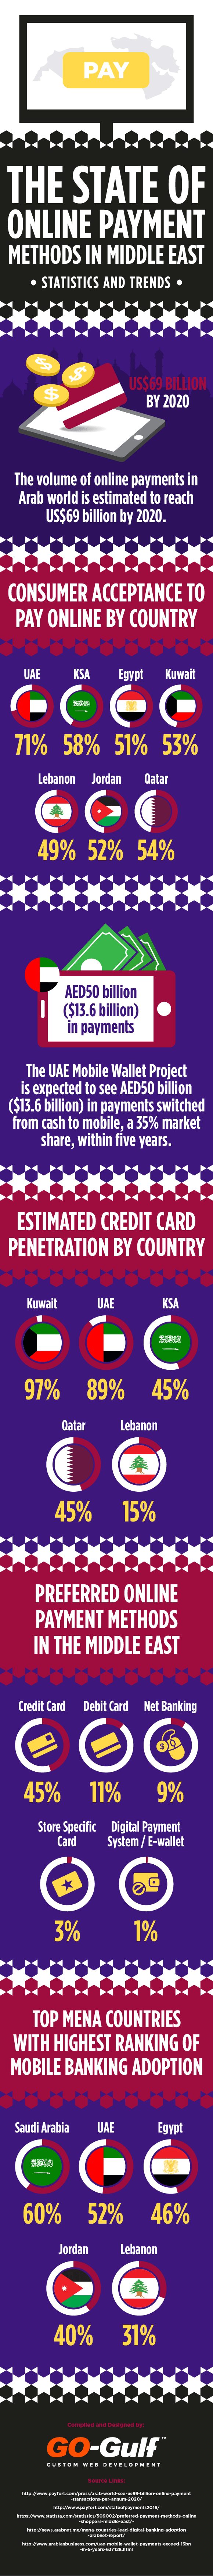 State Of Online Payment Methods In Middle East